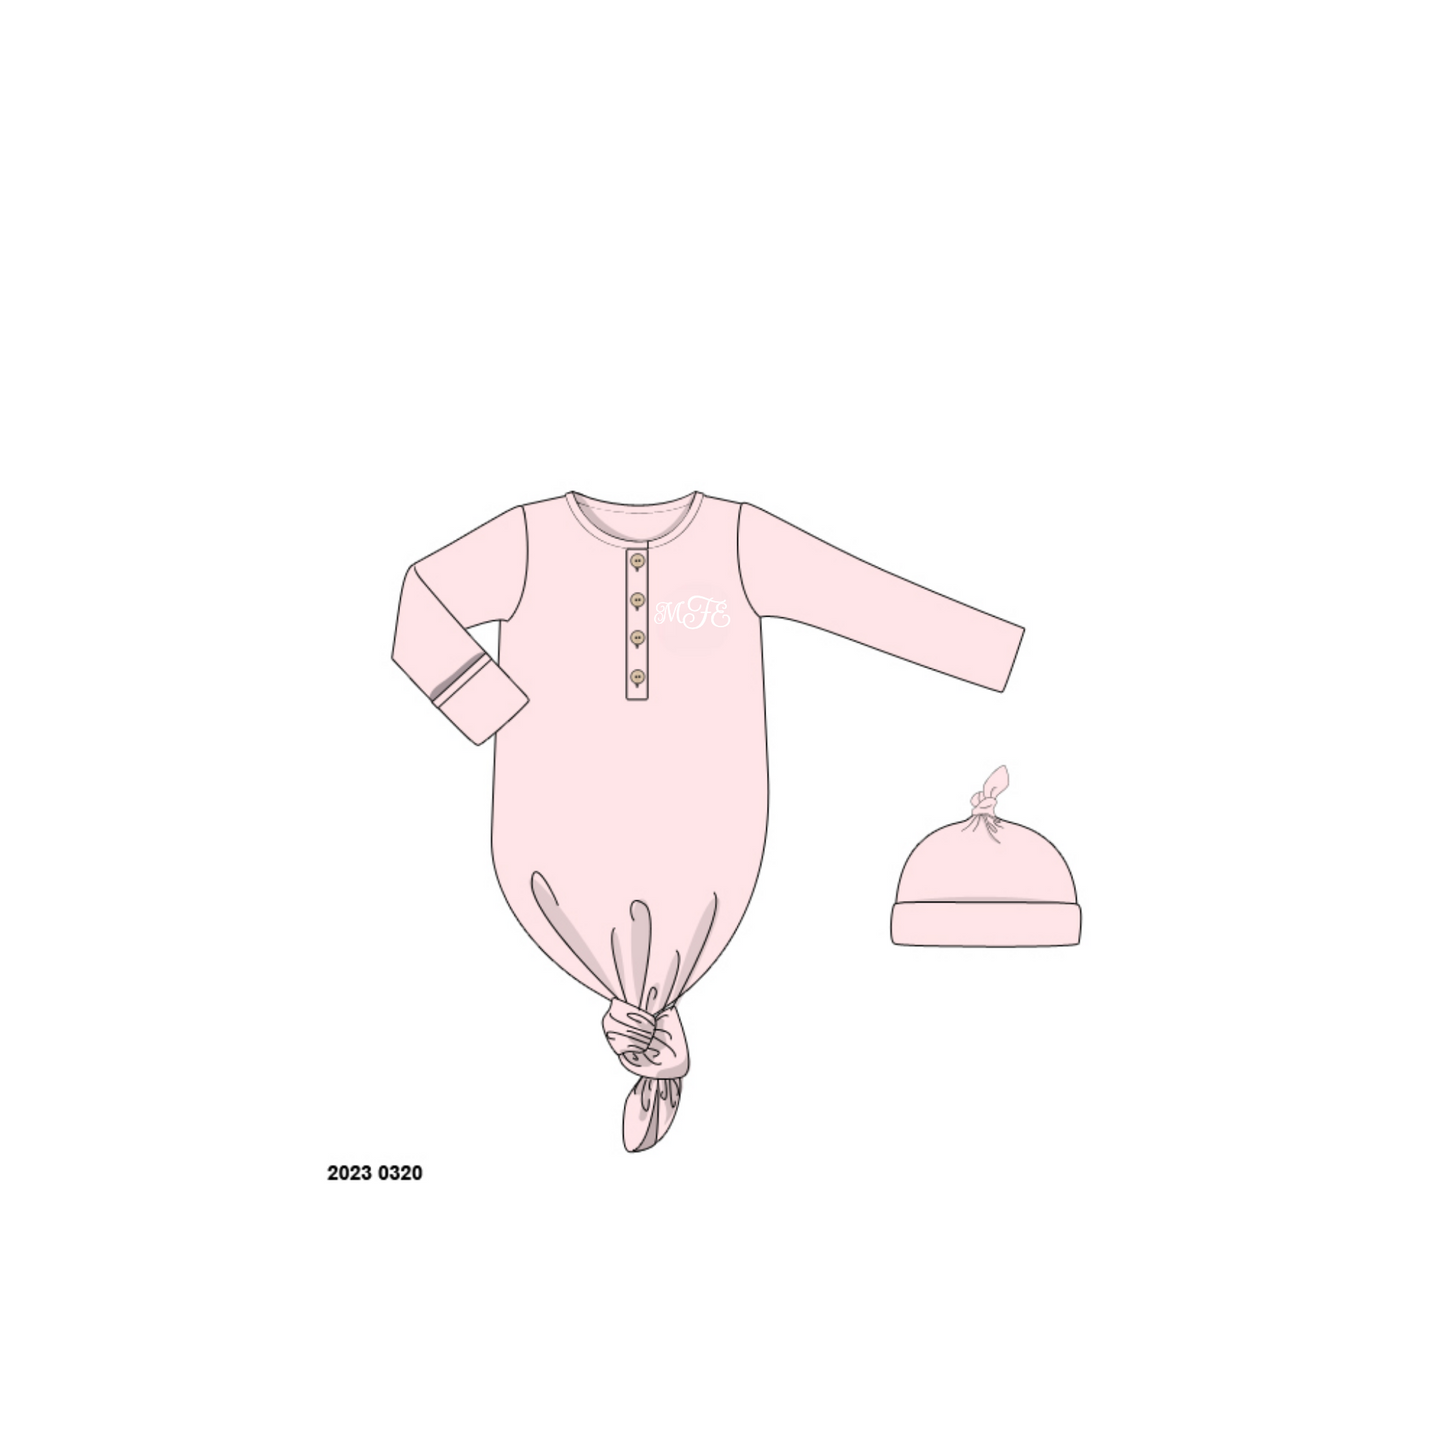 RTS: Honey 2: Hopscotch- Honey Muslin Gown Set in Pink "mFe"